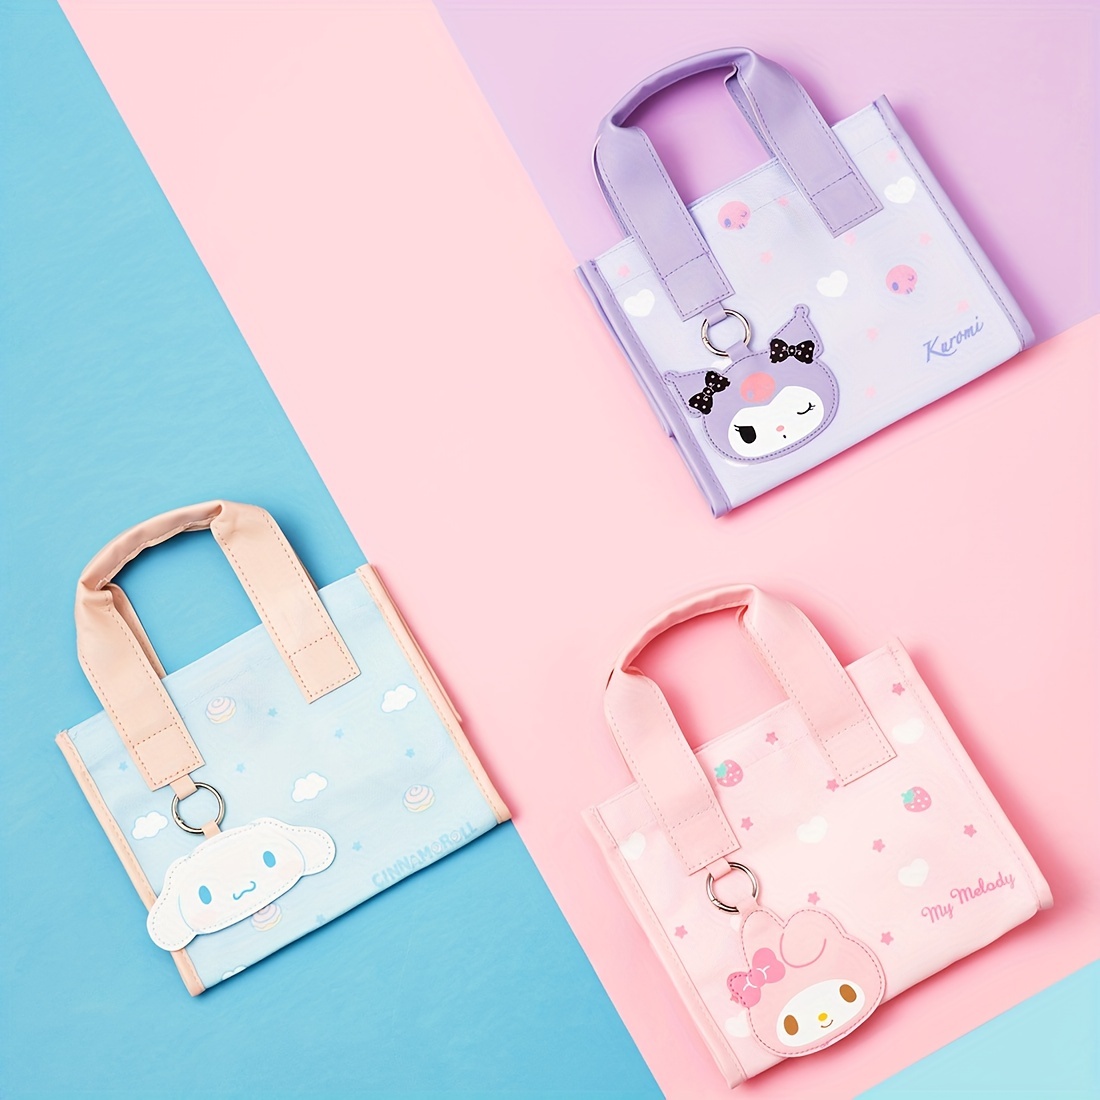 Multifunctional Bags for Everyday Use from Miniso